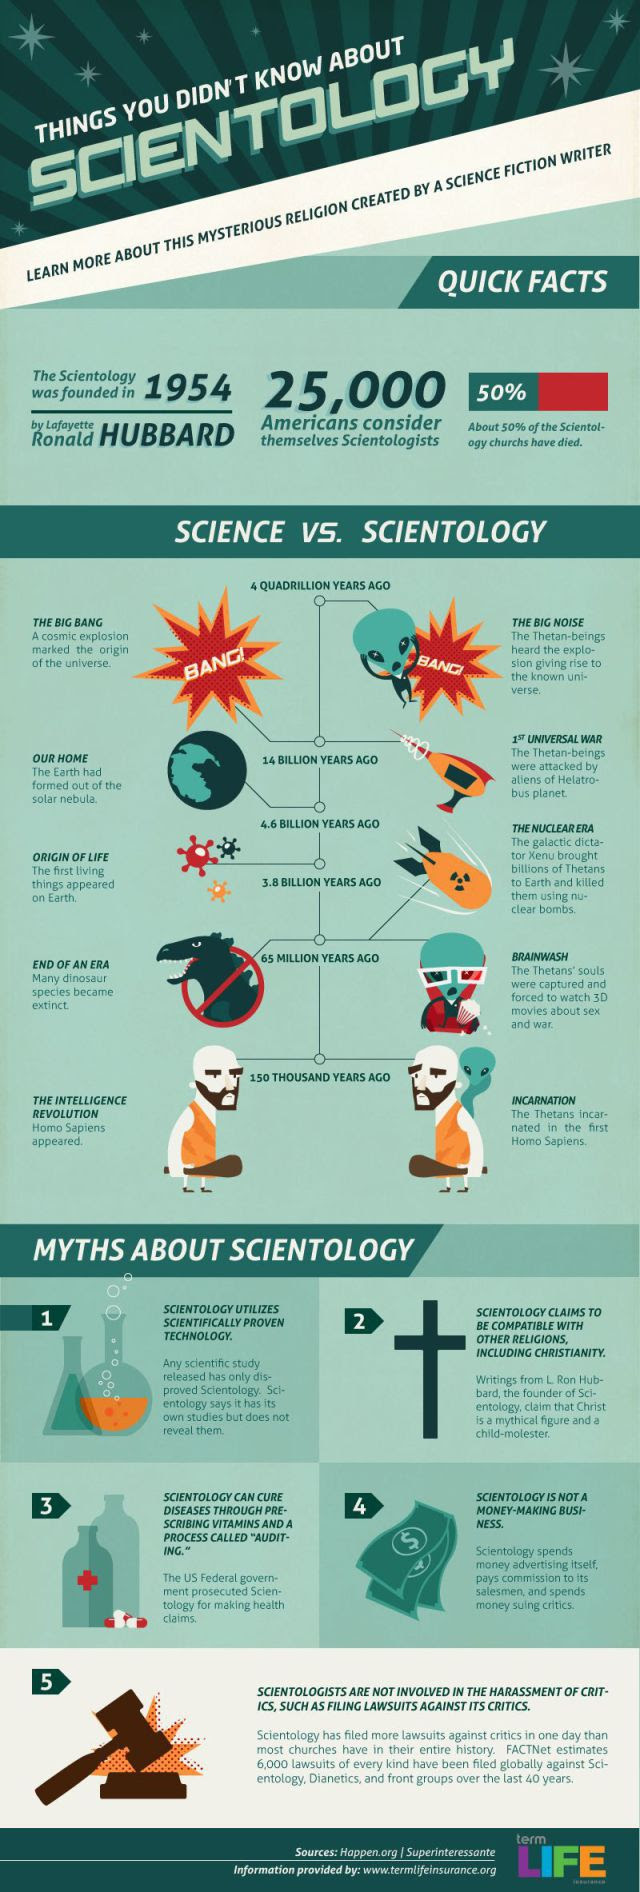 Ridiculous Things You Didnt Know About Scientology (1 pic)